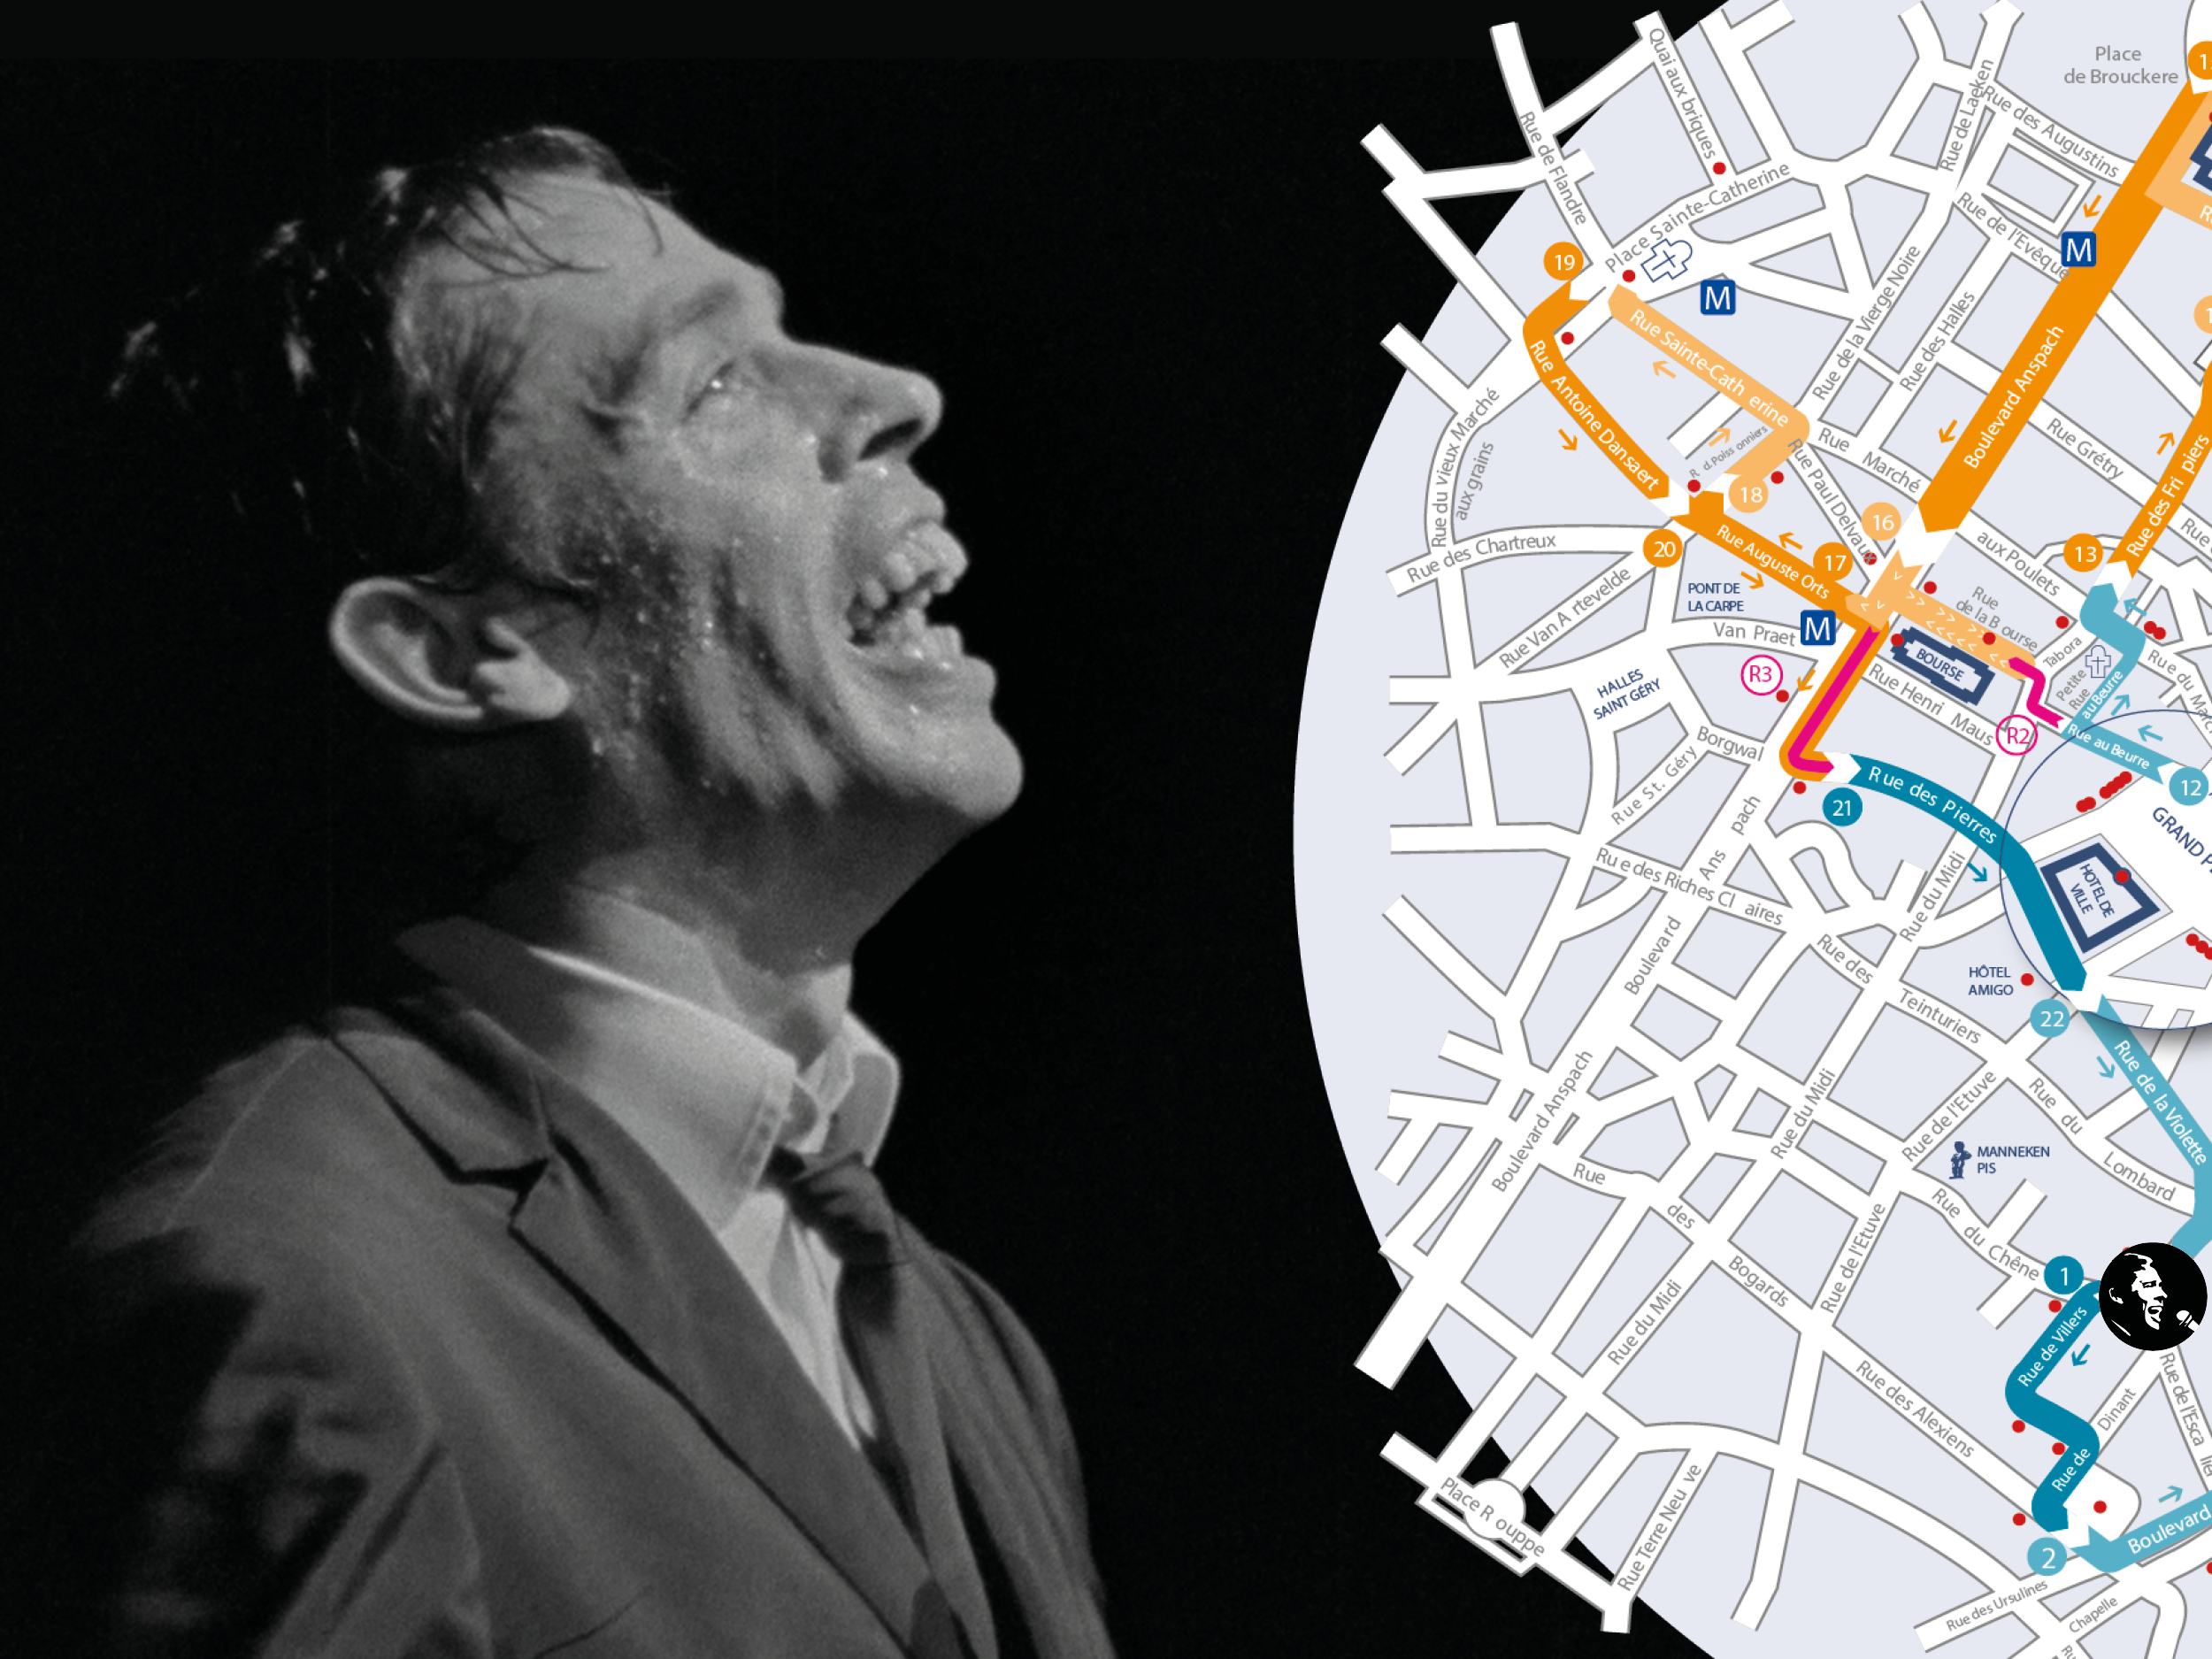 With Brel in Brussels - Walking Tour